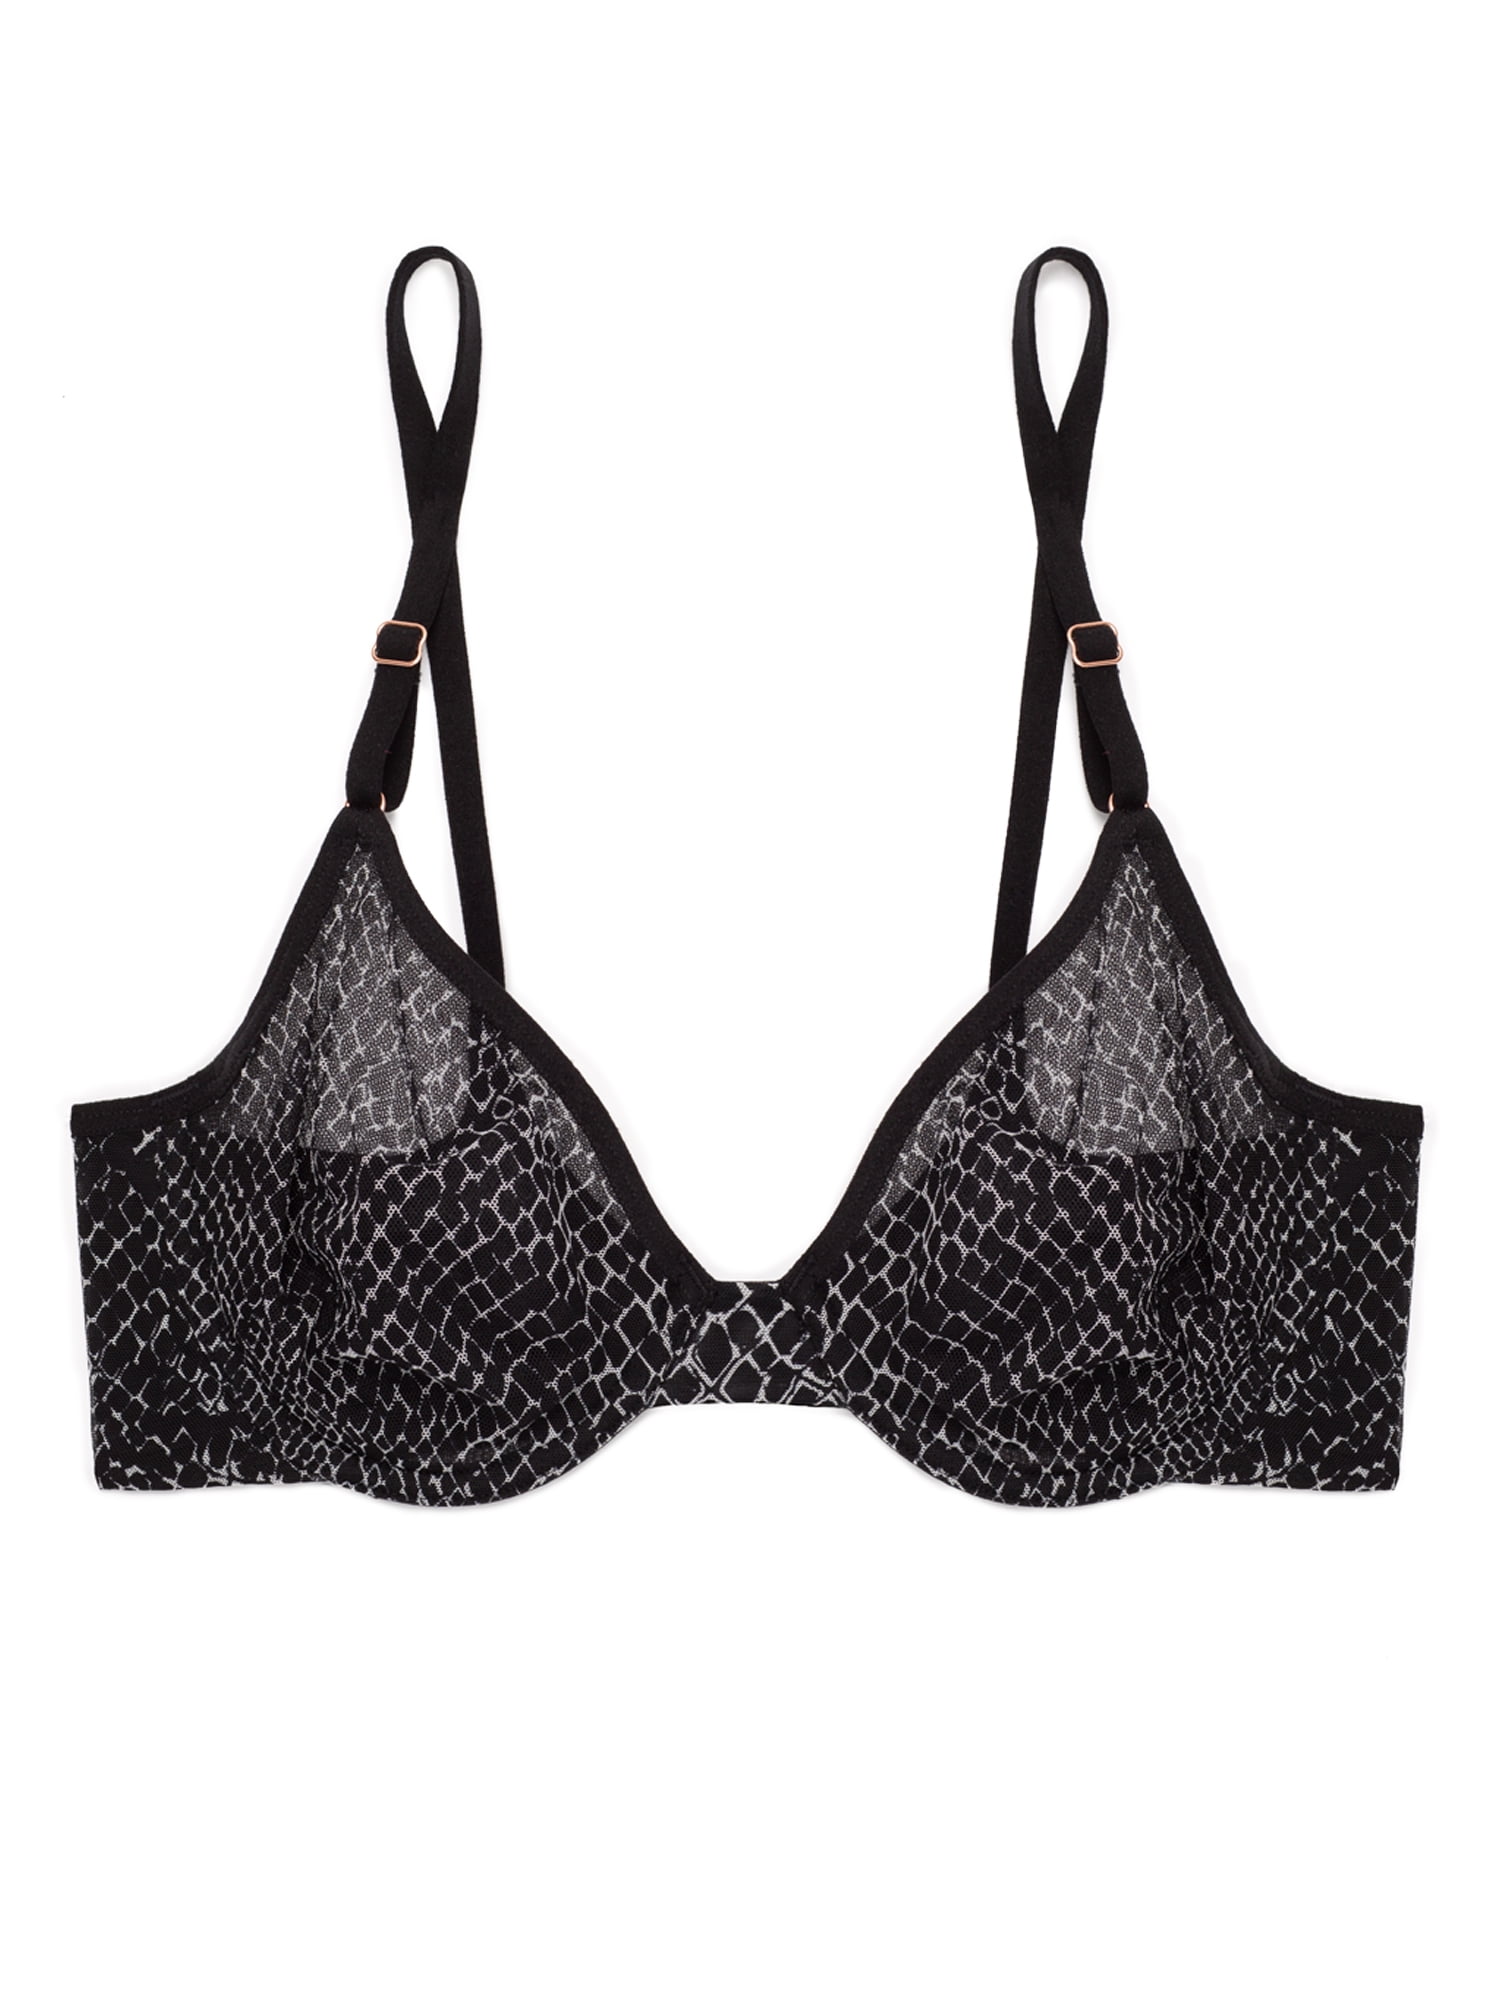 Soma Sensuous Lace Underwire Demi Bra Unlined Sheer Black Size 34 C -  AbuMaizar Dental Roots Clinic